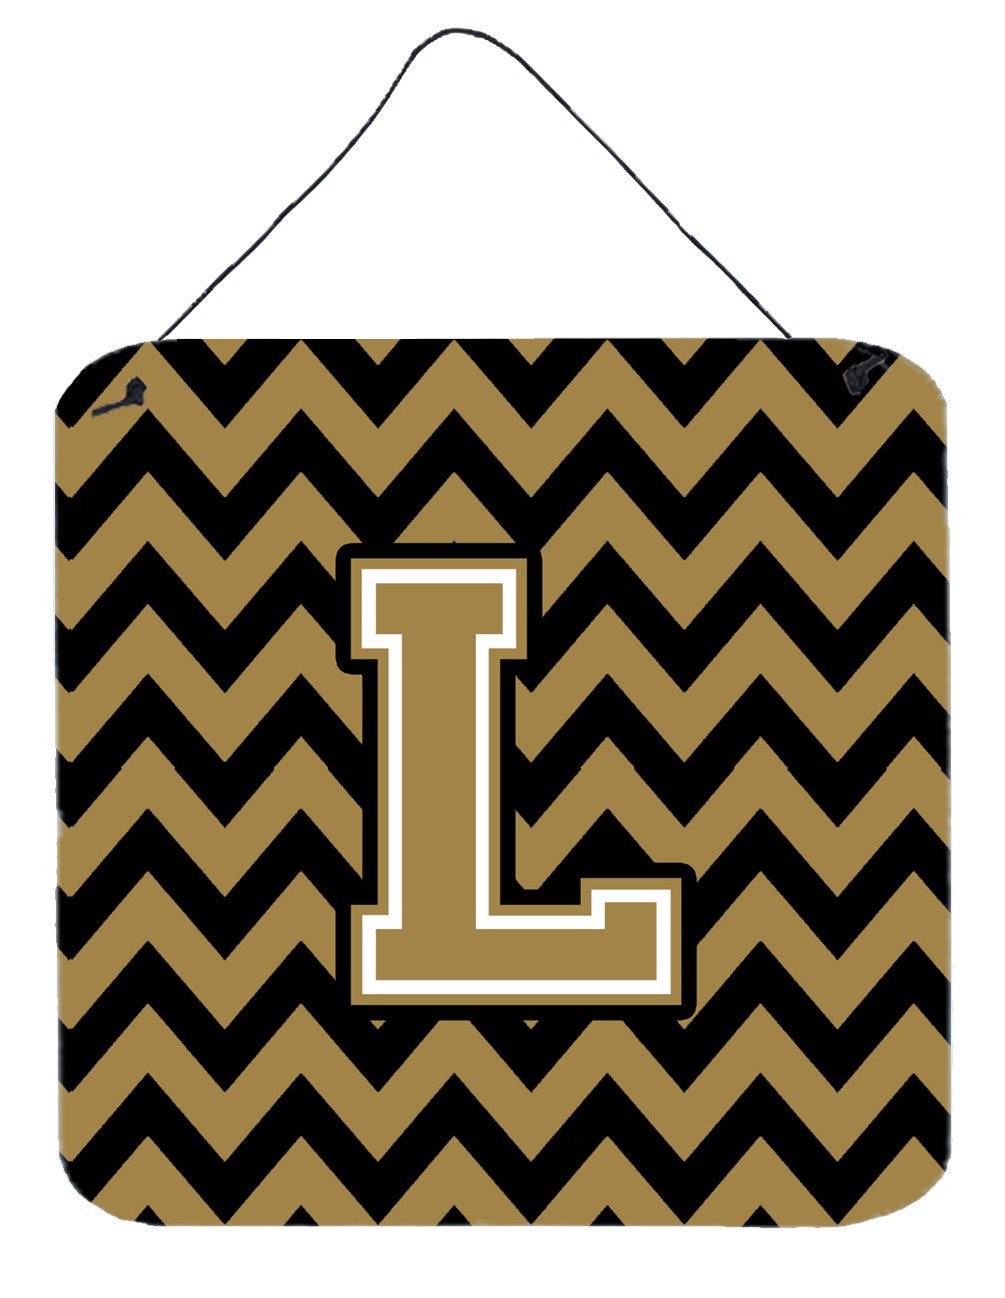 Letter L Chevron Black and Gold  Wall or Door Hanging Prints CJ1050-LDS66 by Caroline's Treasures